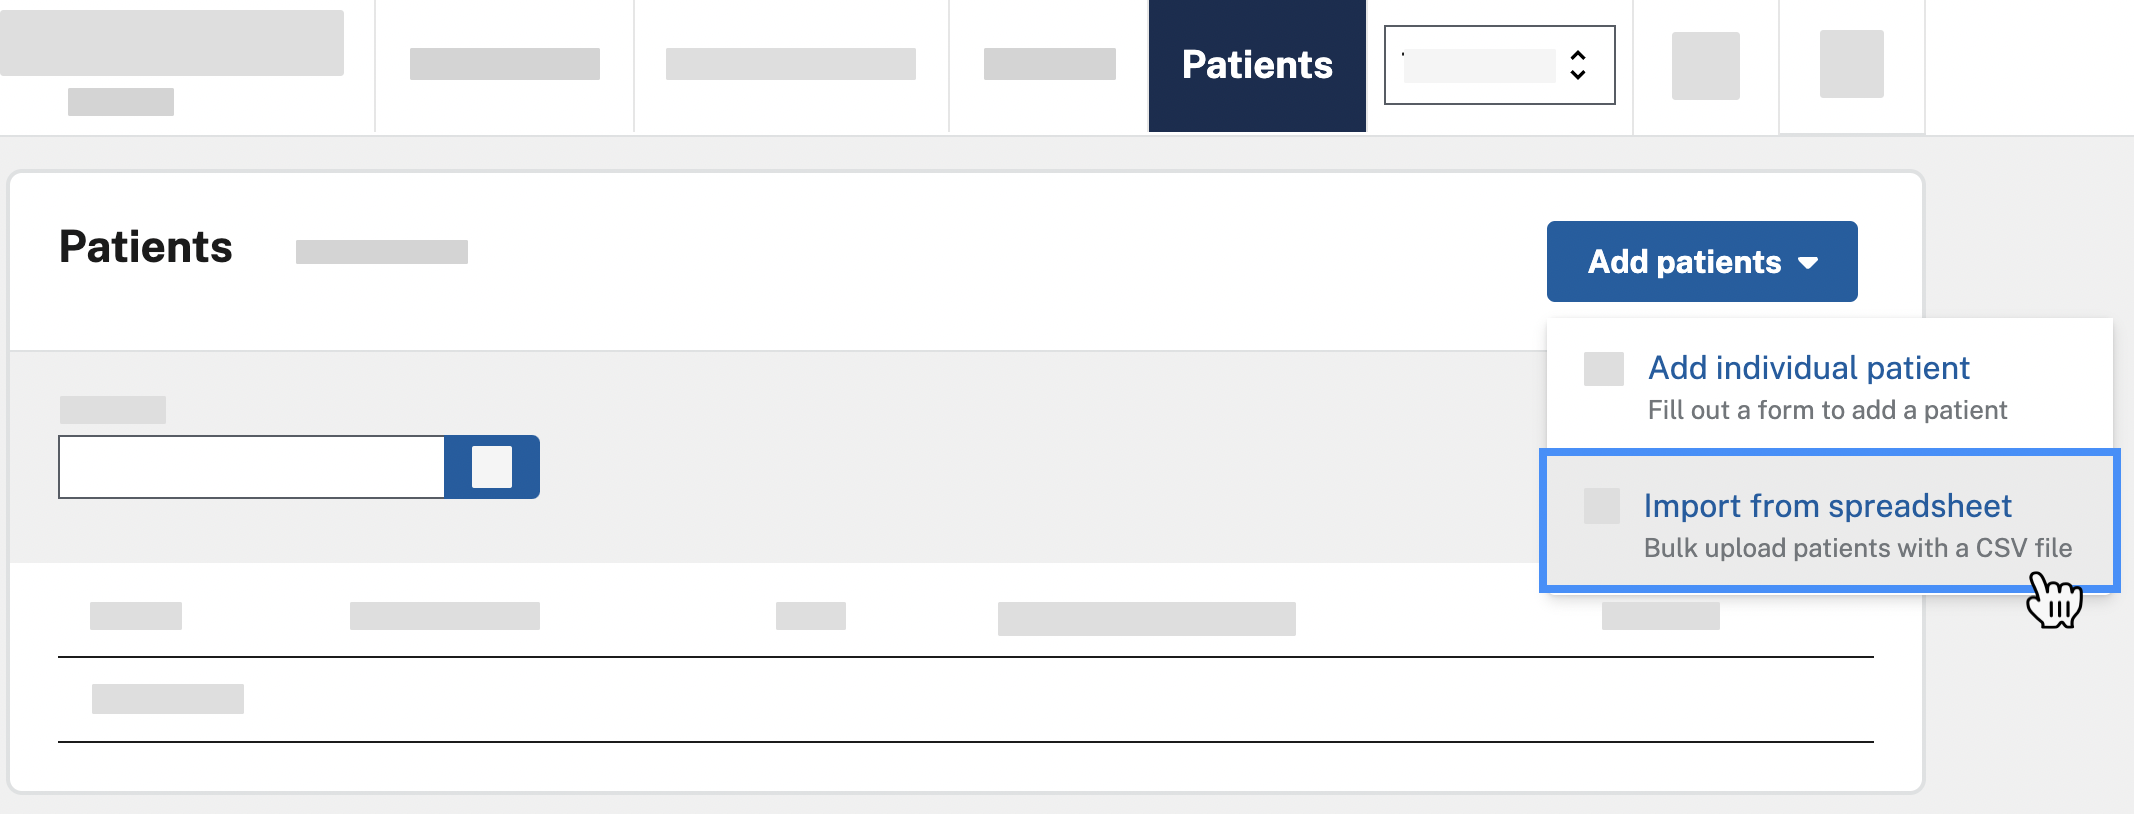 The user's mouse hovering over the "Add patients" button toward the top right of the page